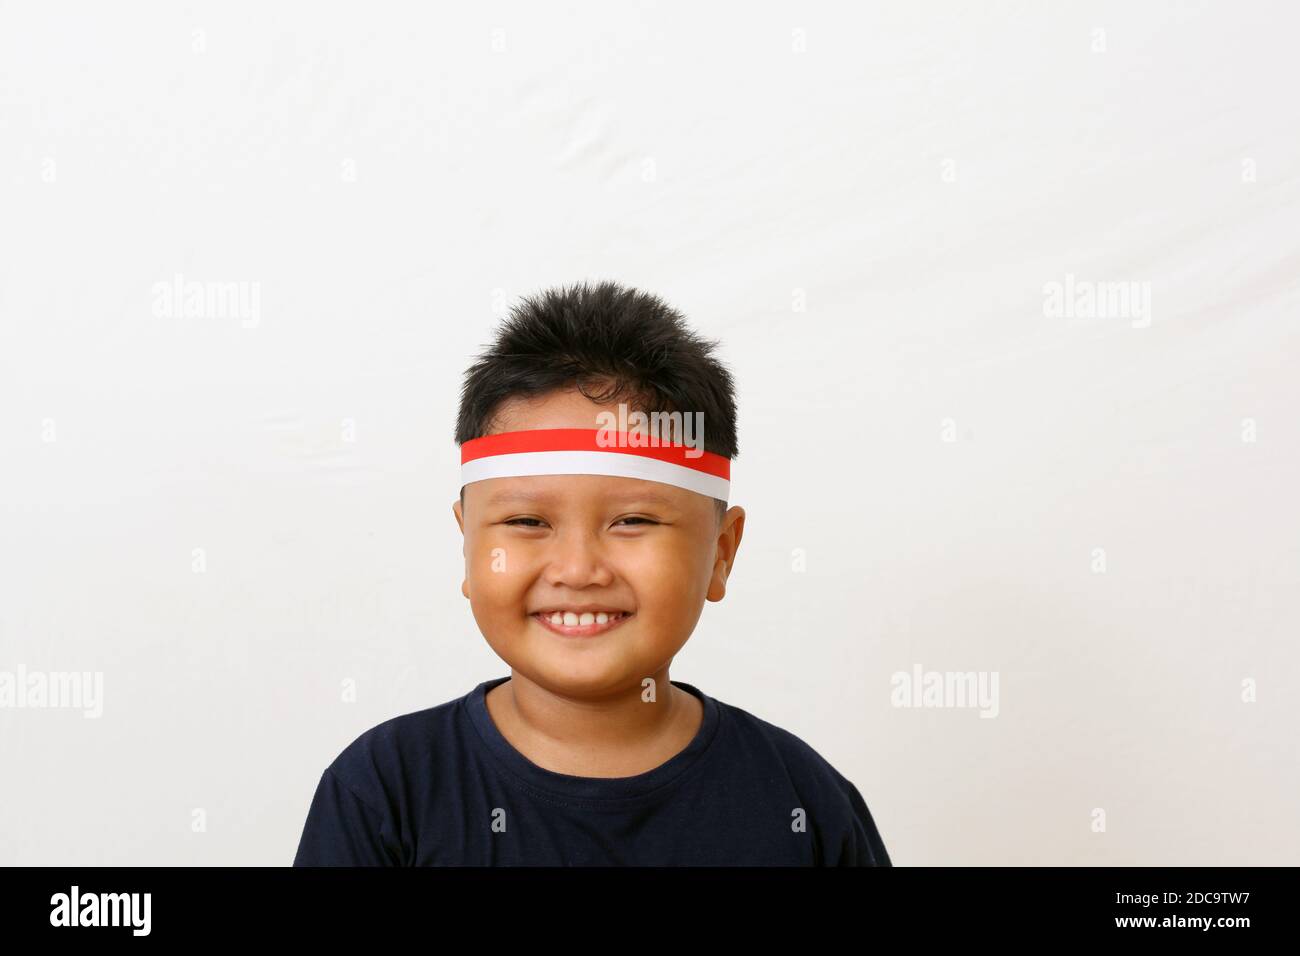 Adorable kids from indonesia celebrate indonesian independence day. Cheerful expressions by wearing a red and white headband as a symbol of the Indone Stock Photo